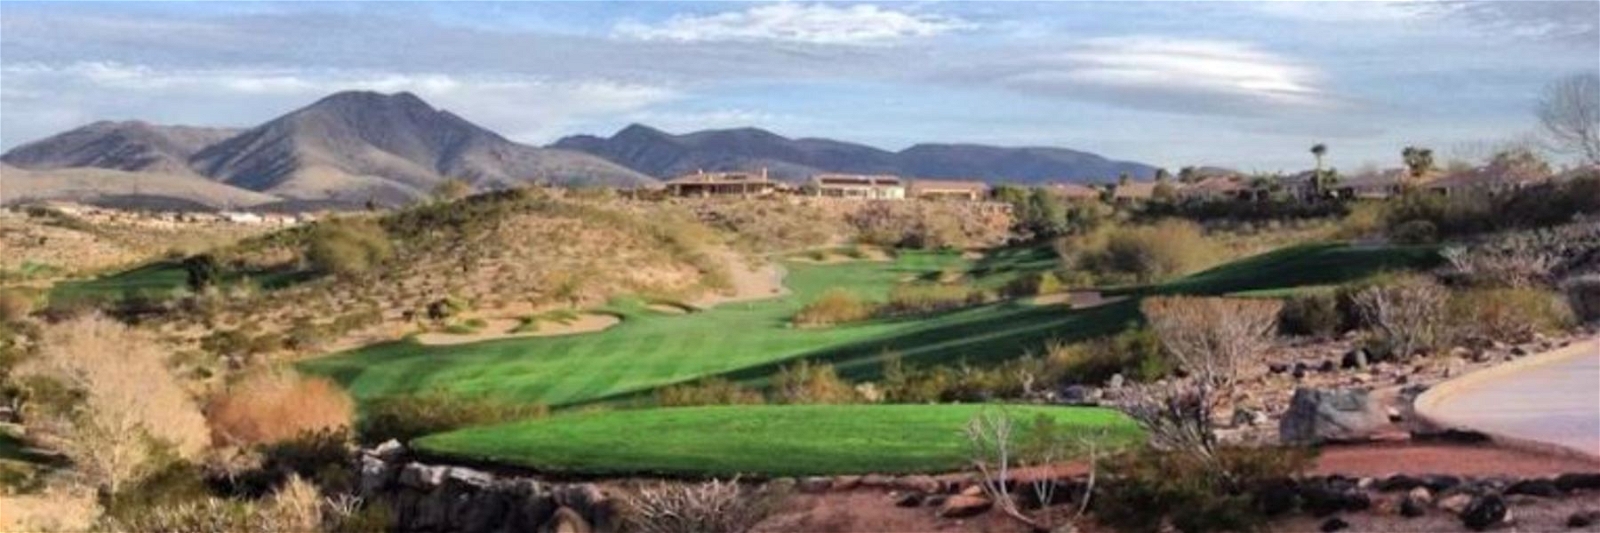 Golf Vacation Package - VEGAS BABY!  MGM + Rhodes Ranch/Revere/Boulder Creek from $275!